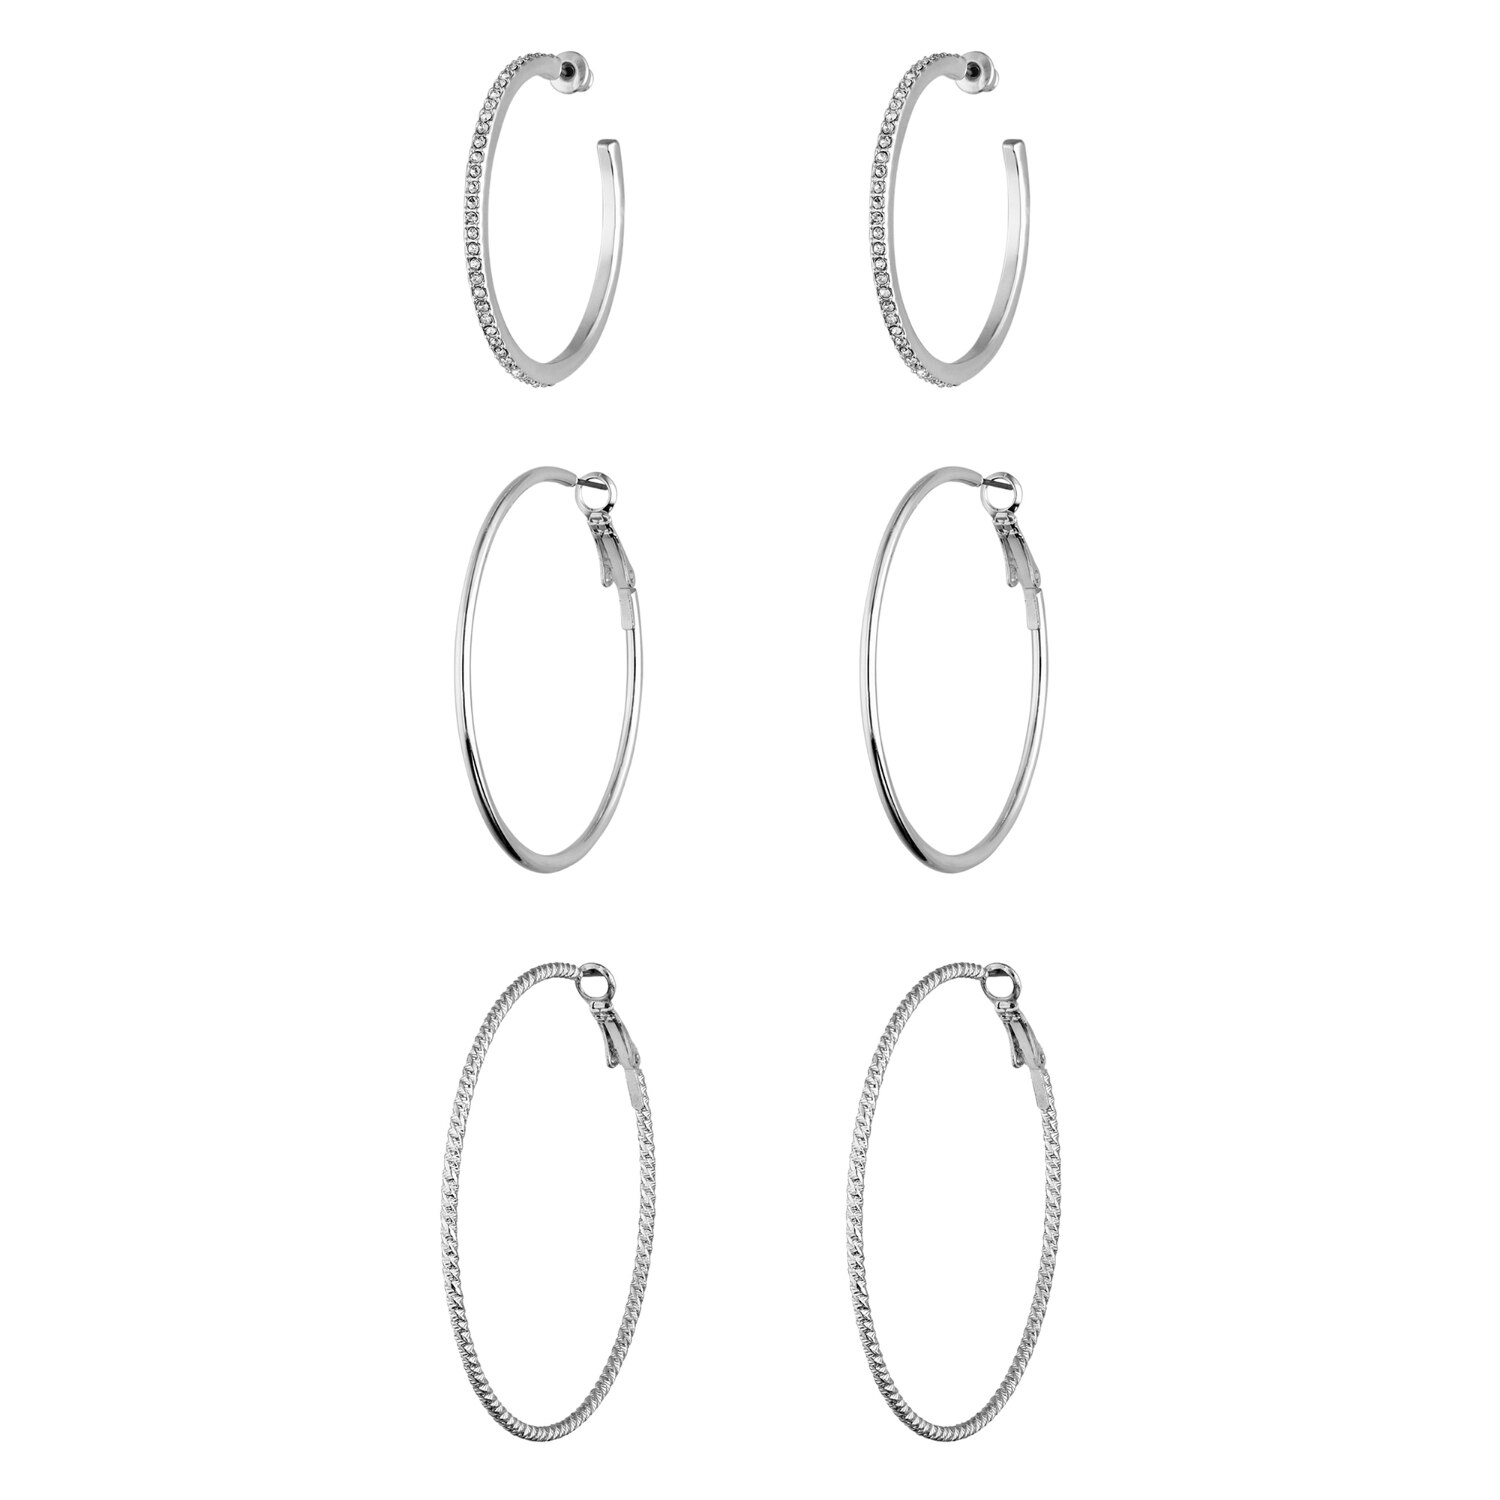 I AM Jewelry Creole Hoop Earring Set, Real Silver, 6CT , CVS